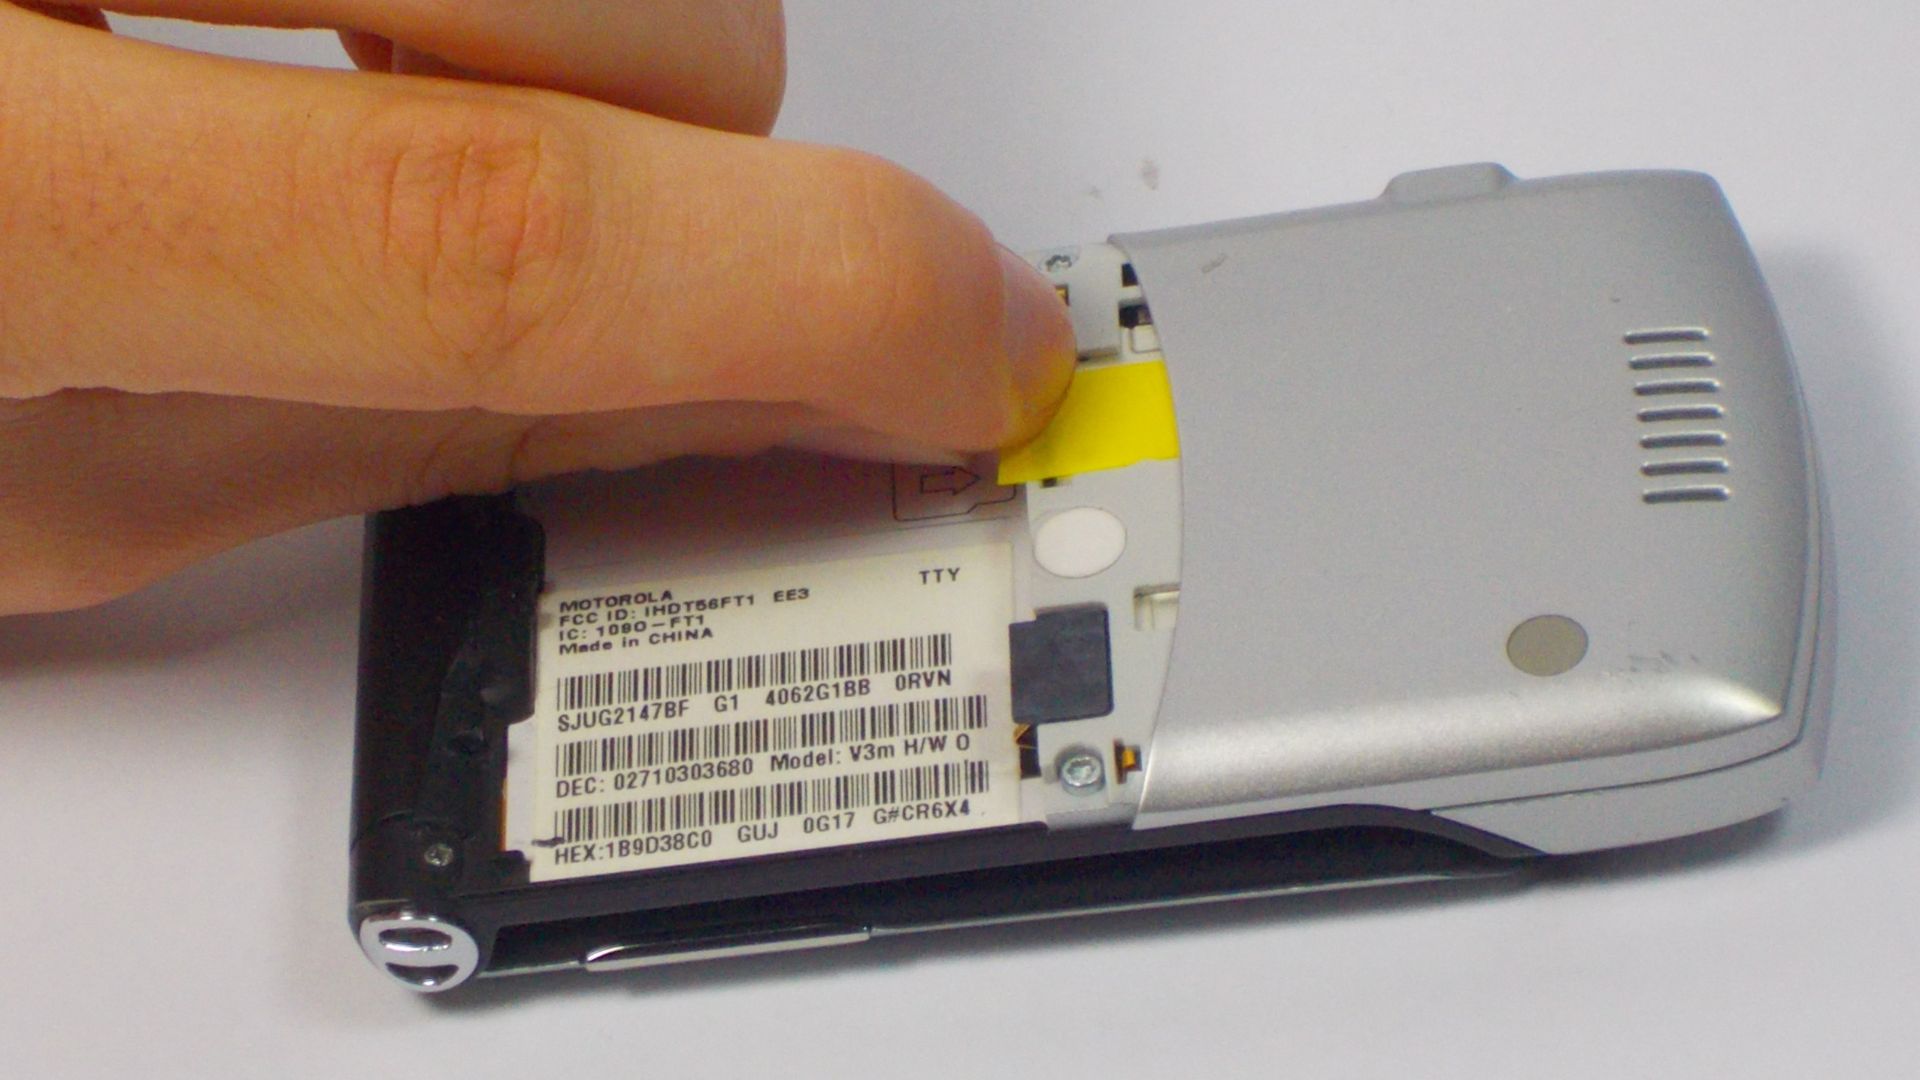 Removing SIM Card From Droid Razr: A Step-by-Step Guide